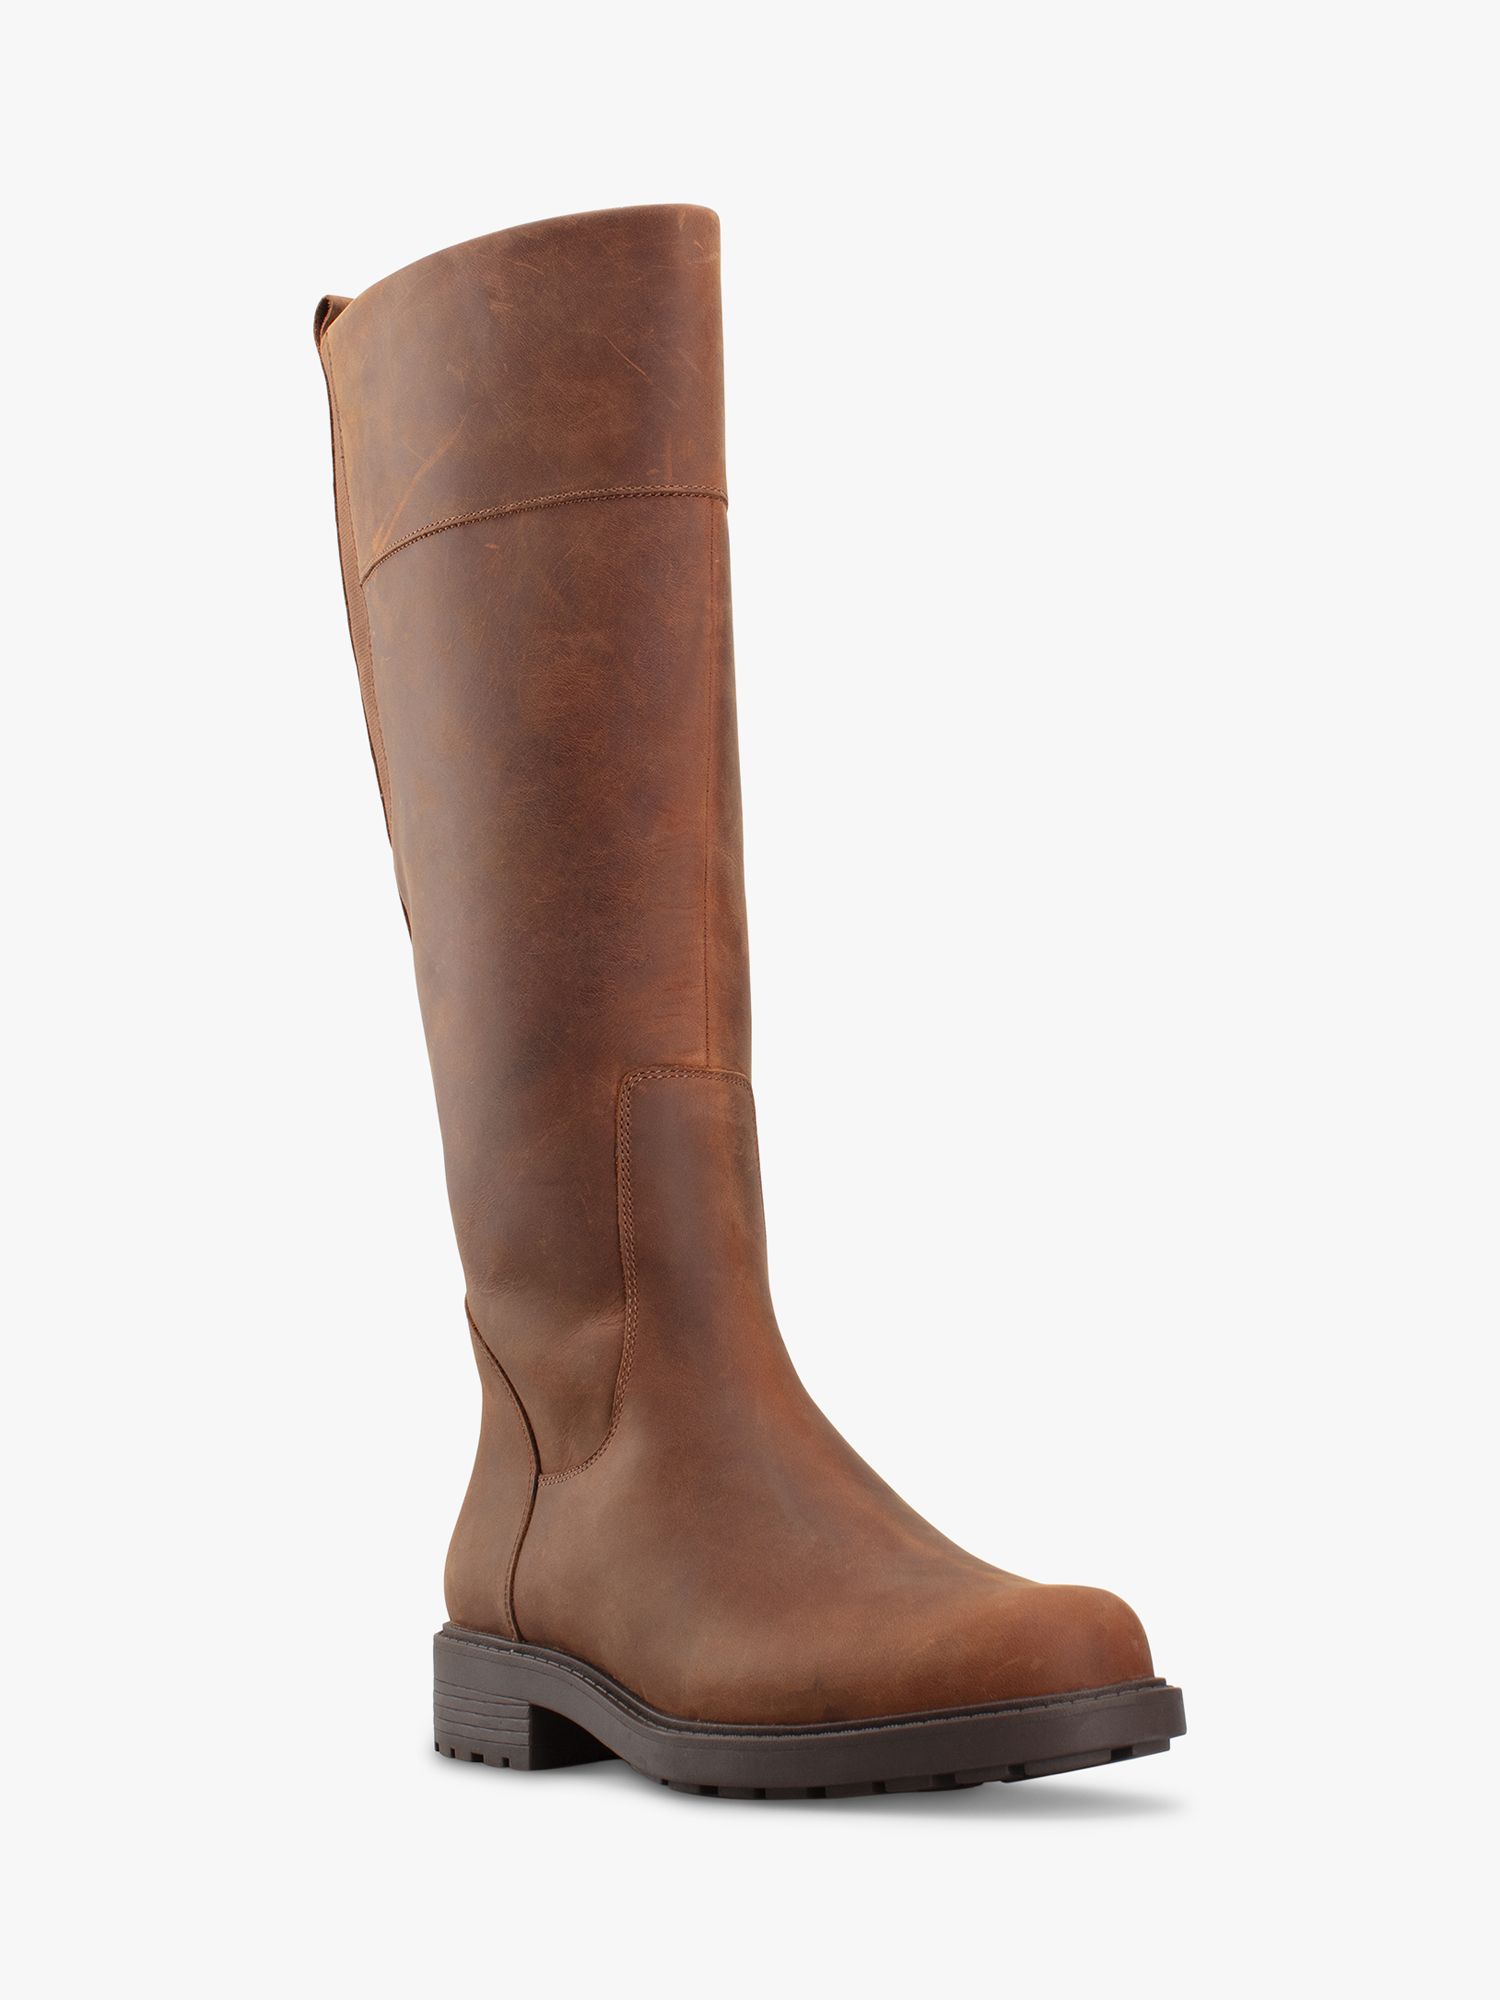 Clarks Orinoco 2 Leather Warm Lined Calf Boots, Tan at John Lewis ...